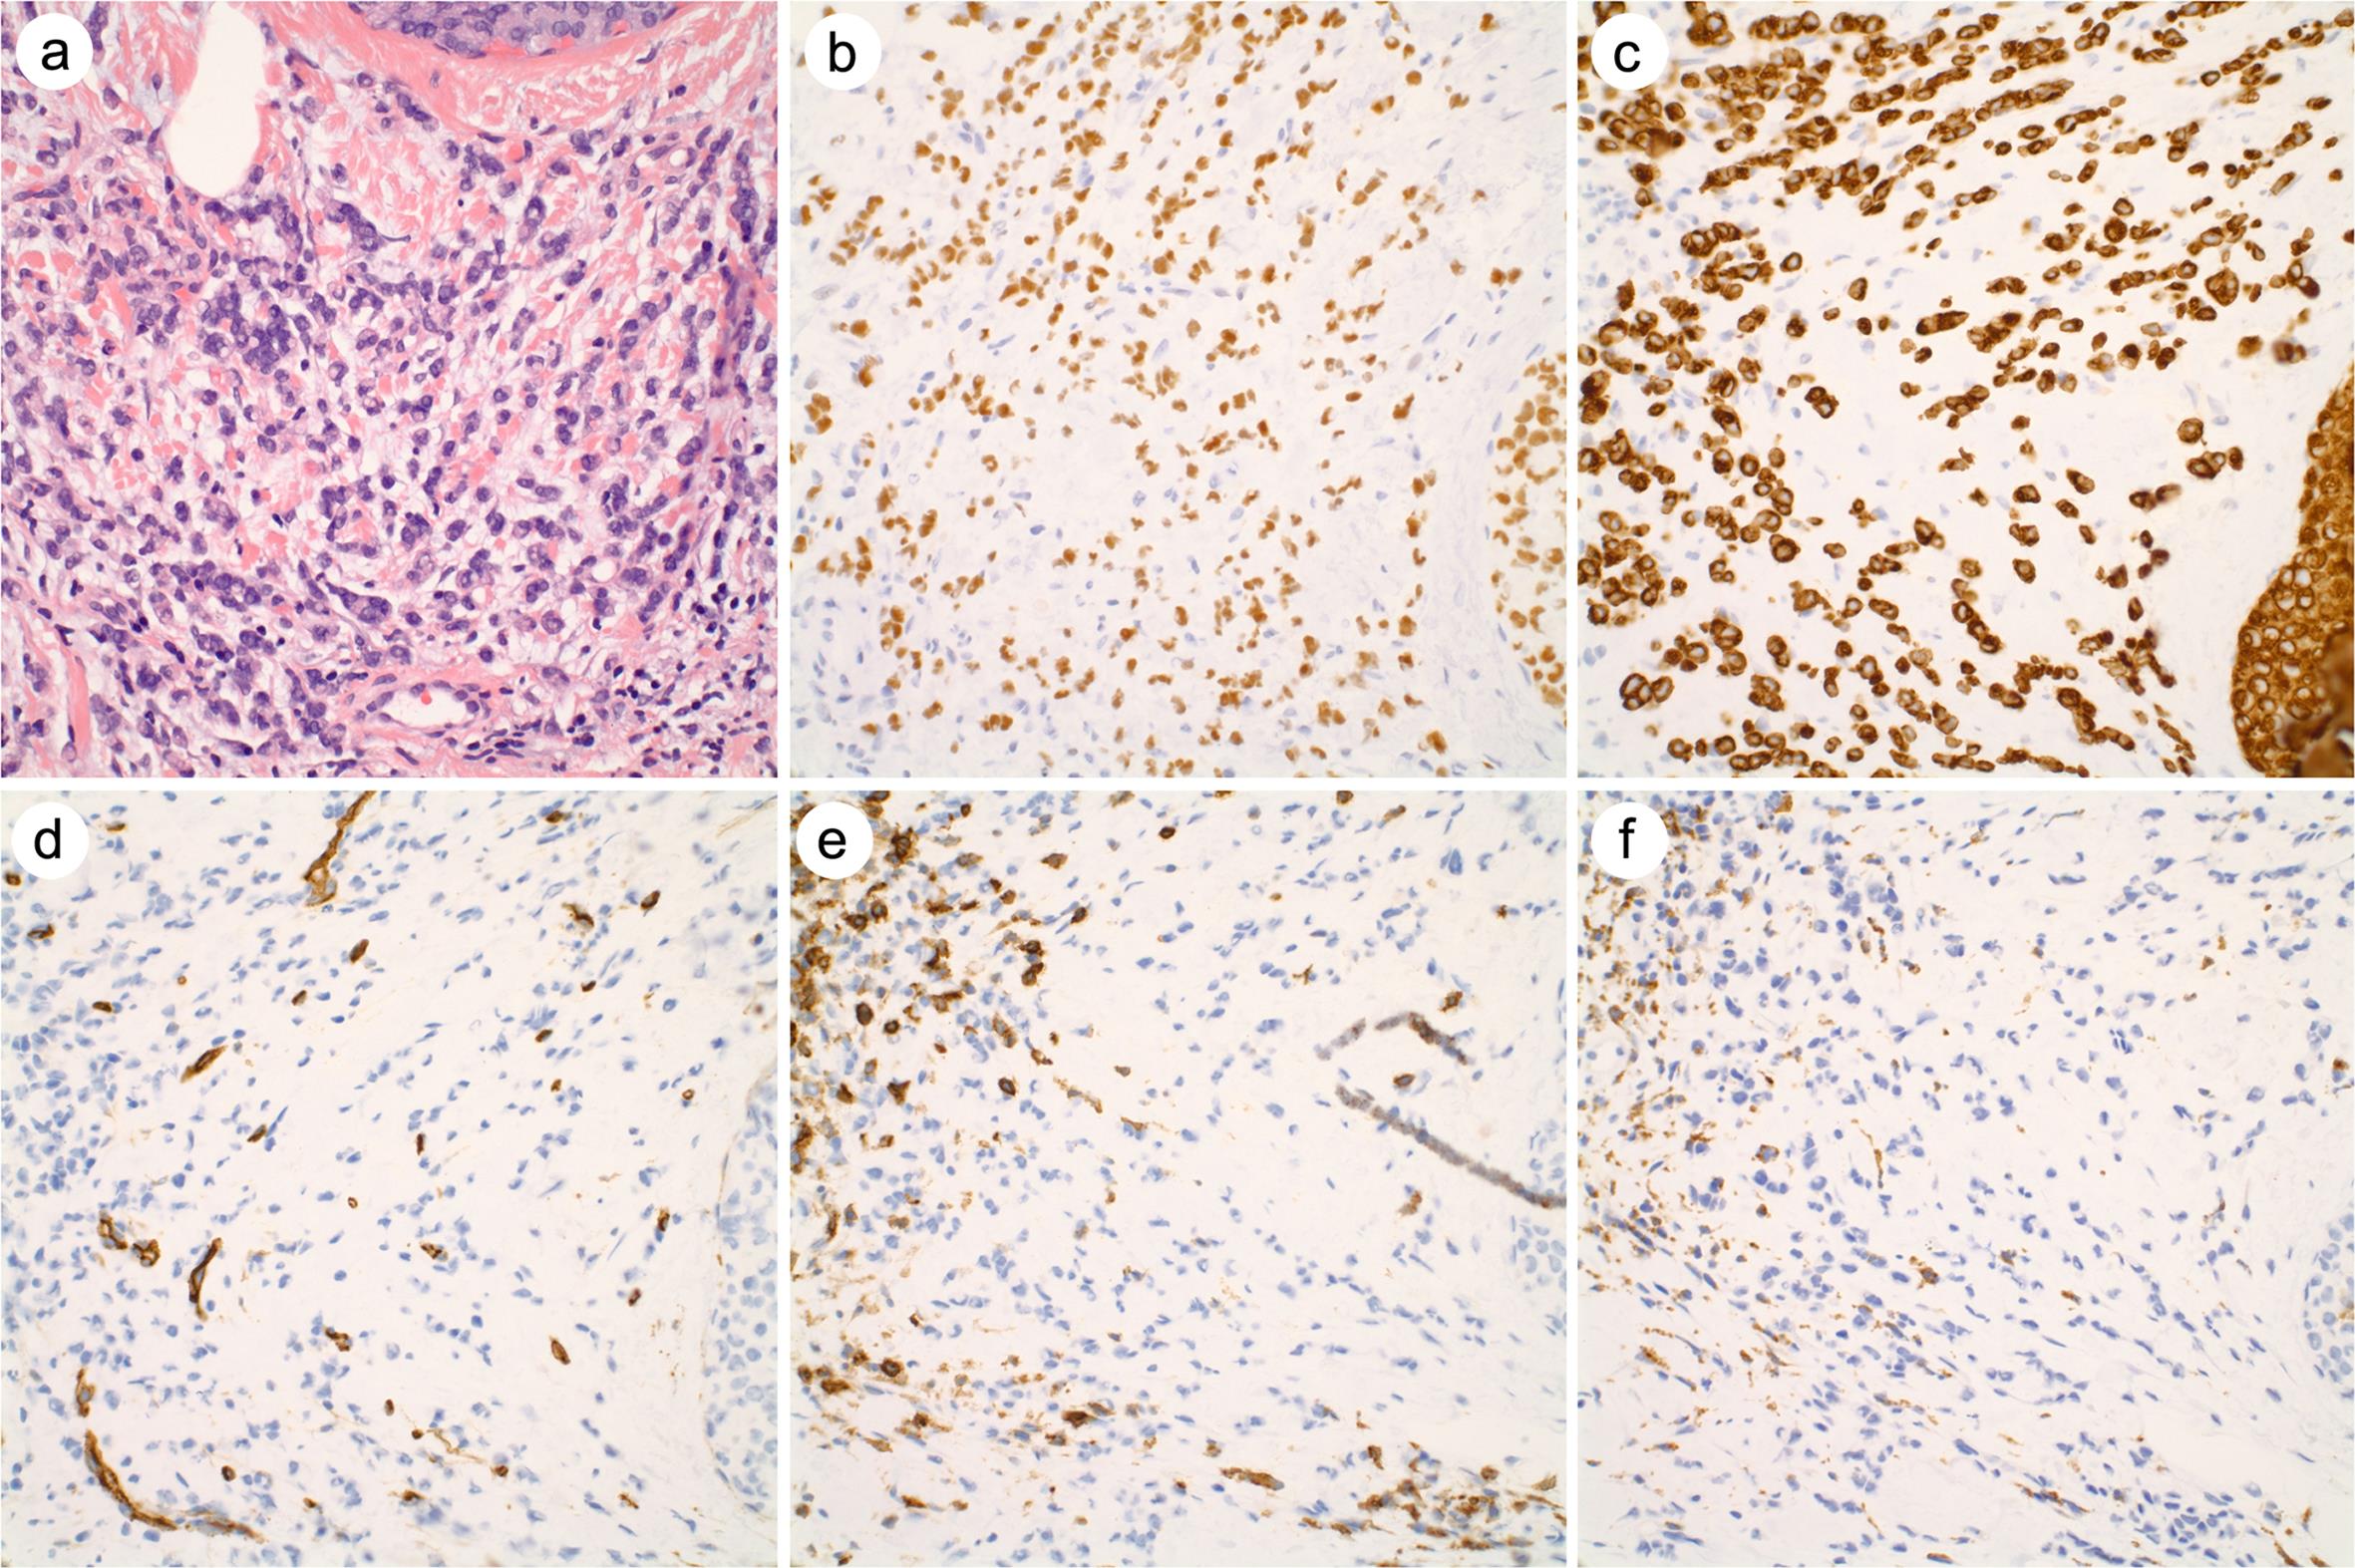 An example of invasive lobular carcinoma with high background of non-tumor cells.